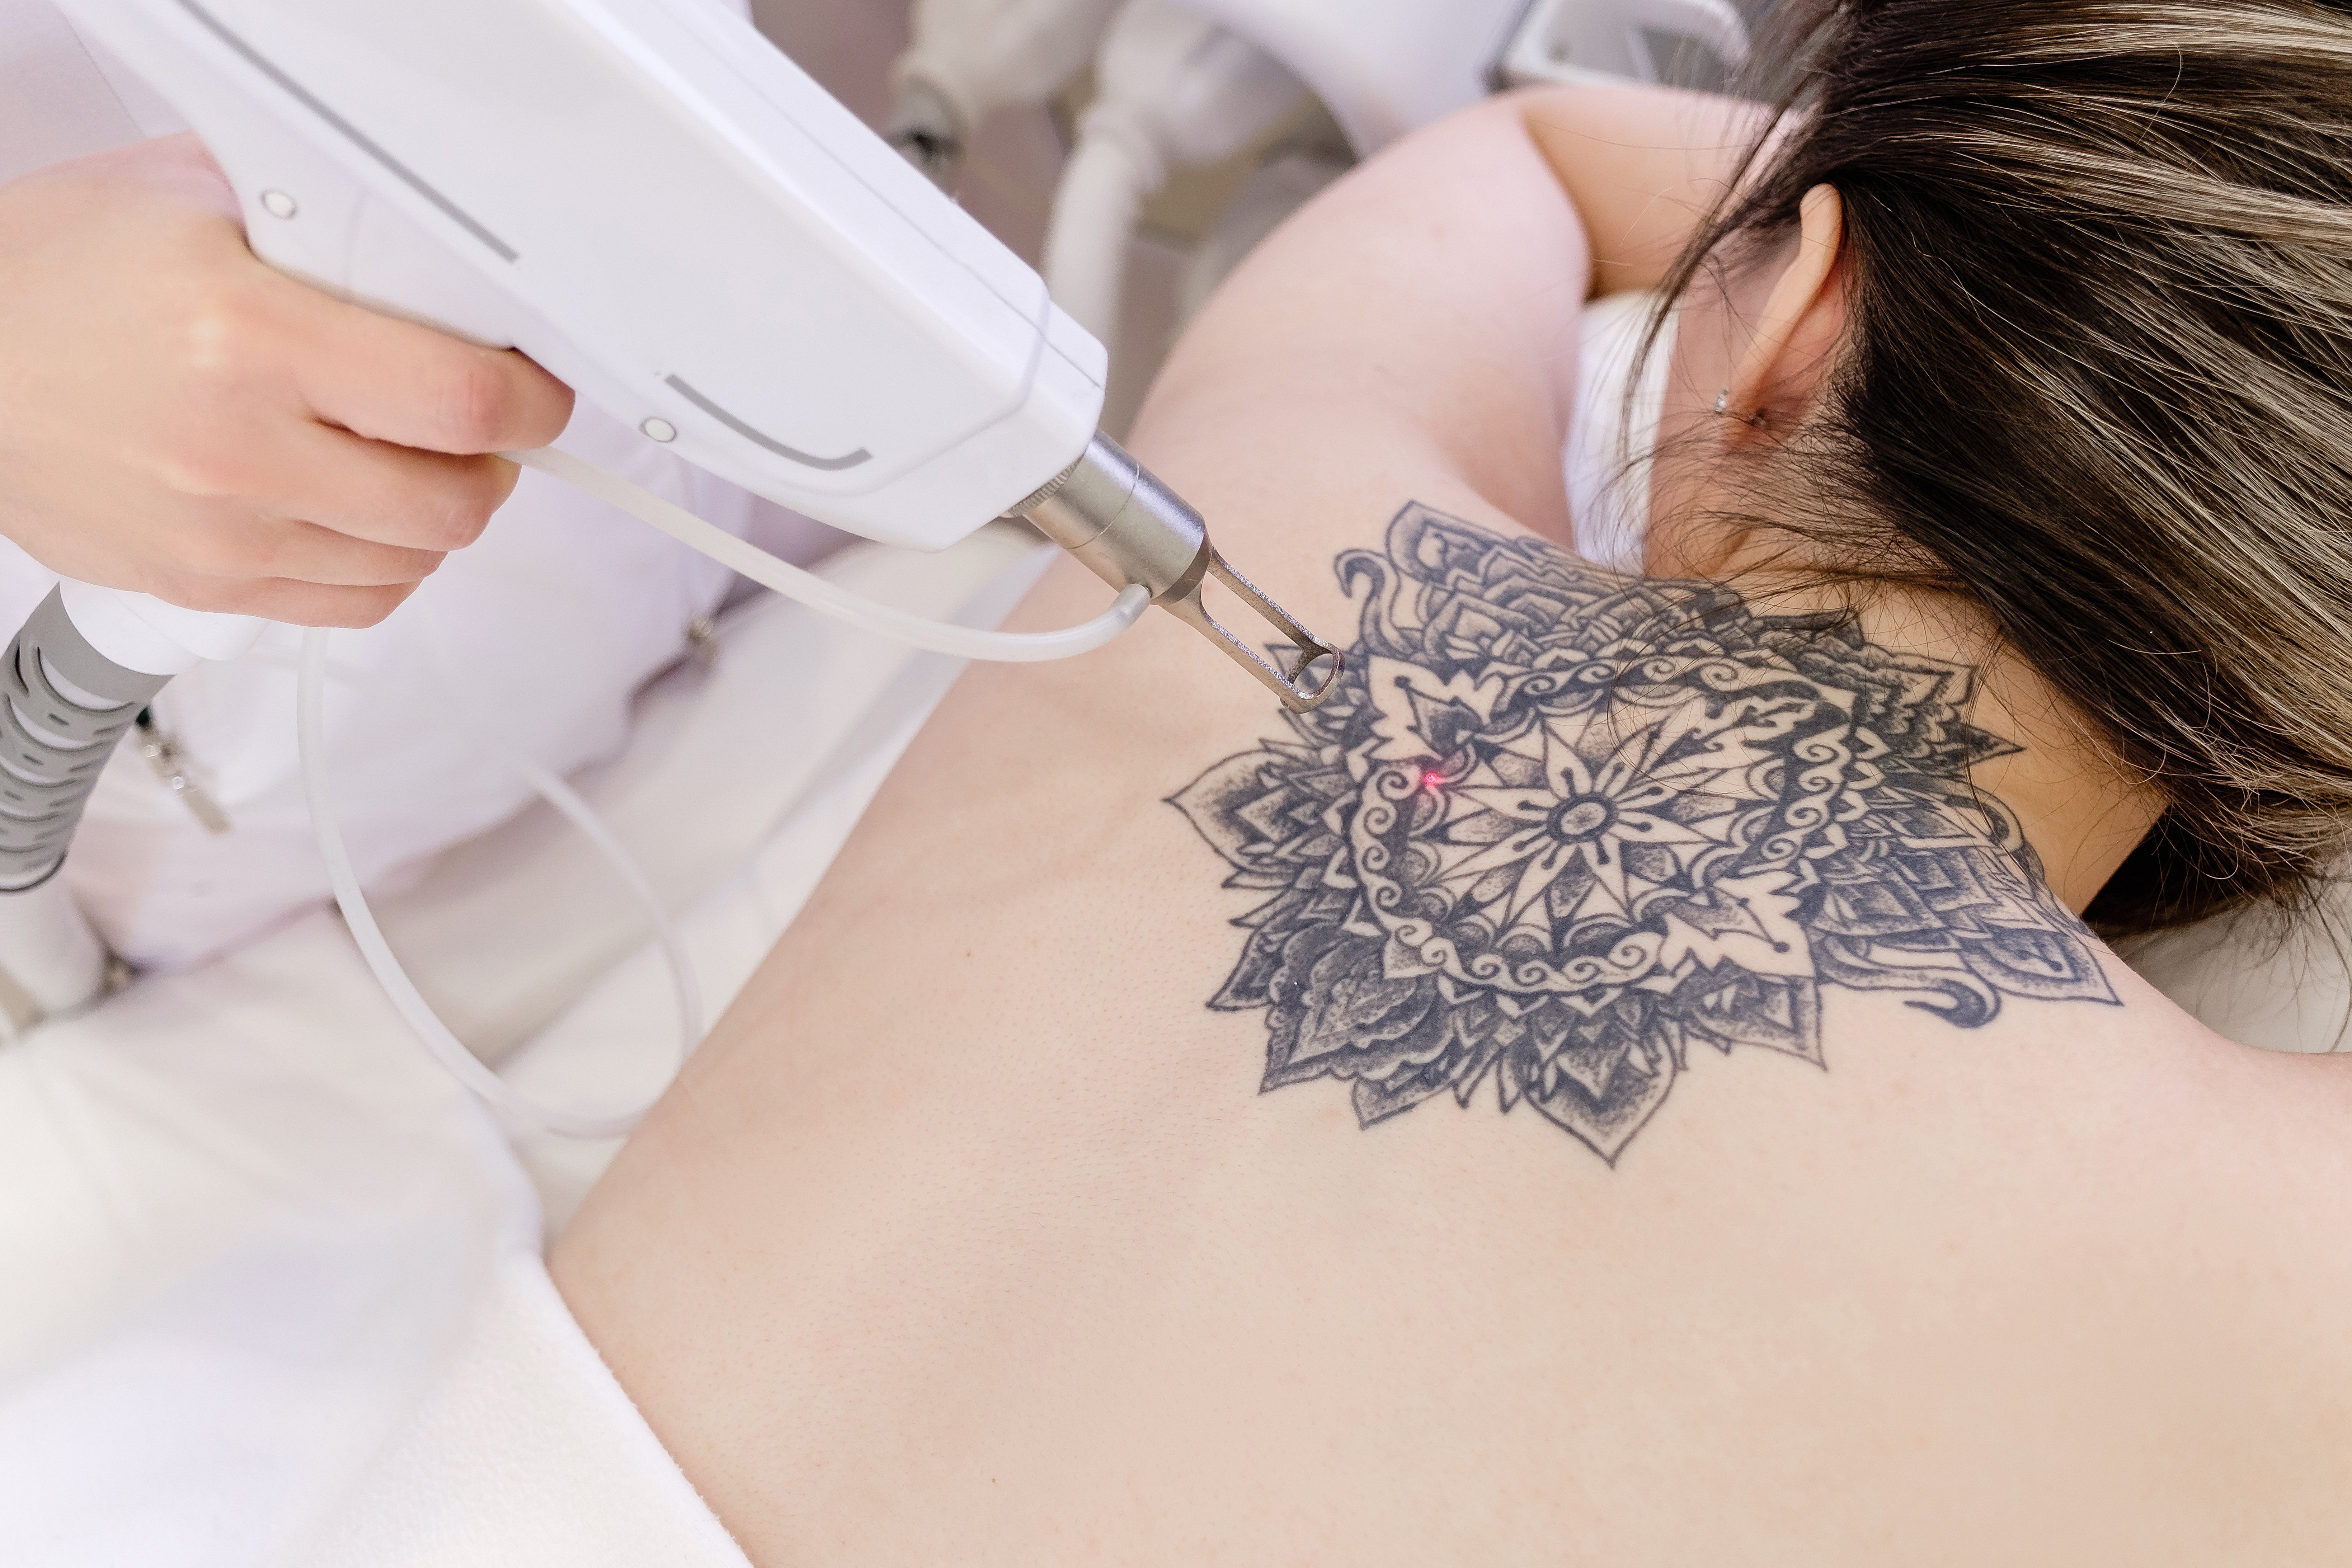 What to Expect From Laser Tattoo Removal